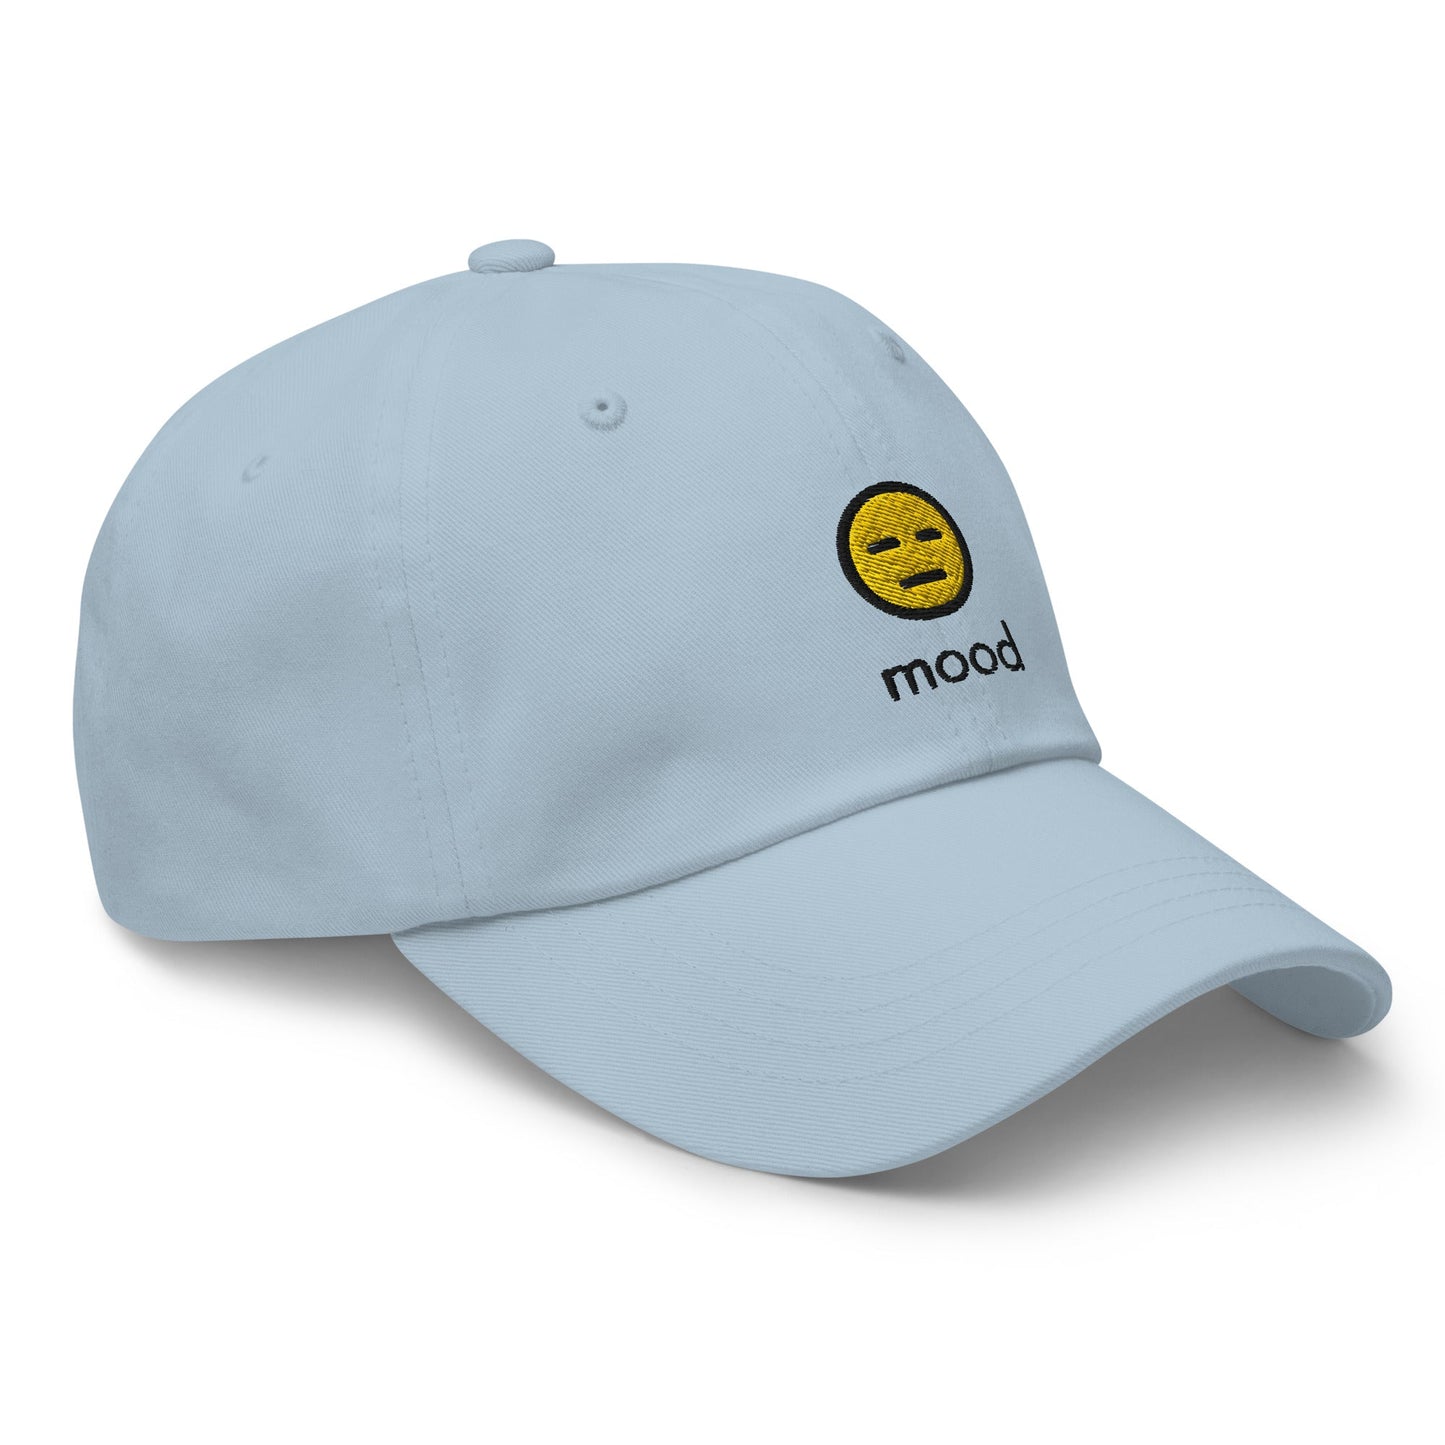 Unimpressed Mood Embroidered Classic Hat - chucklecouture co.